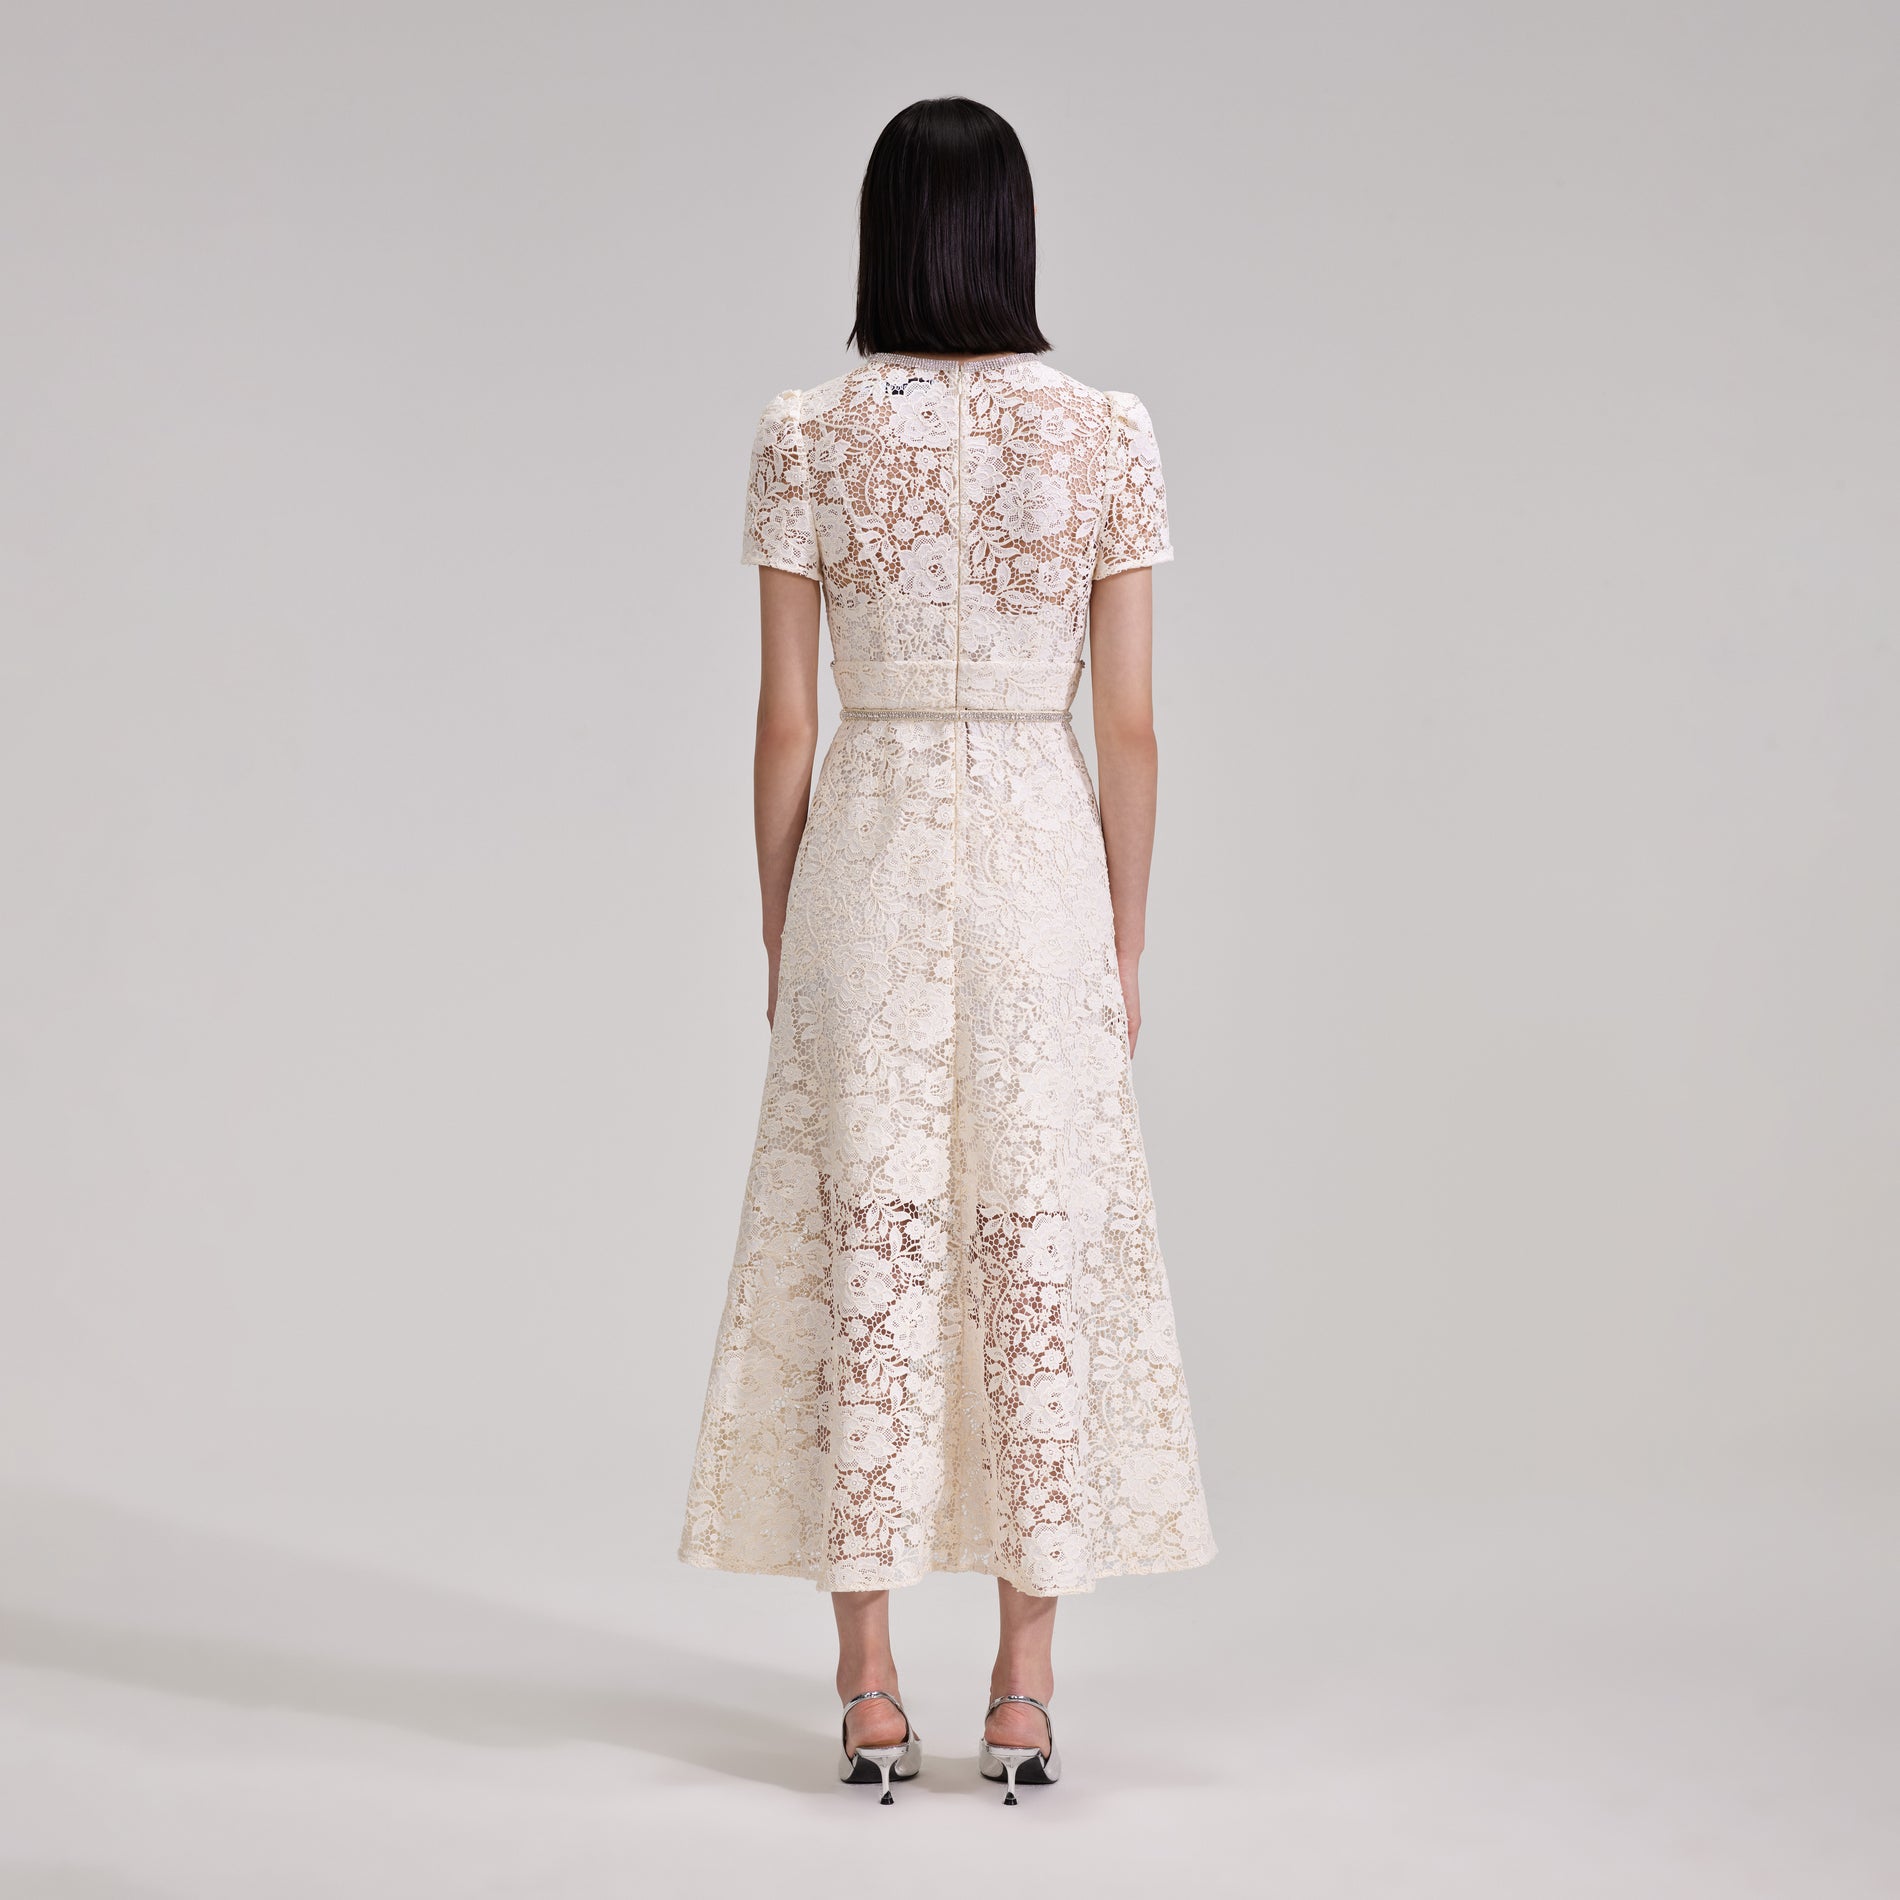 A woman wearing the Cream Cord Lace Bow Midi Dress